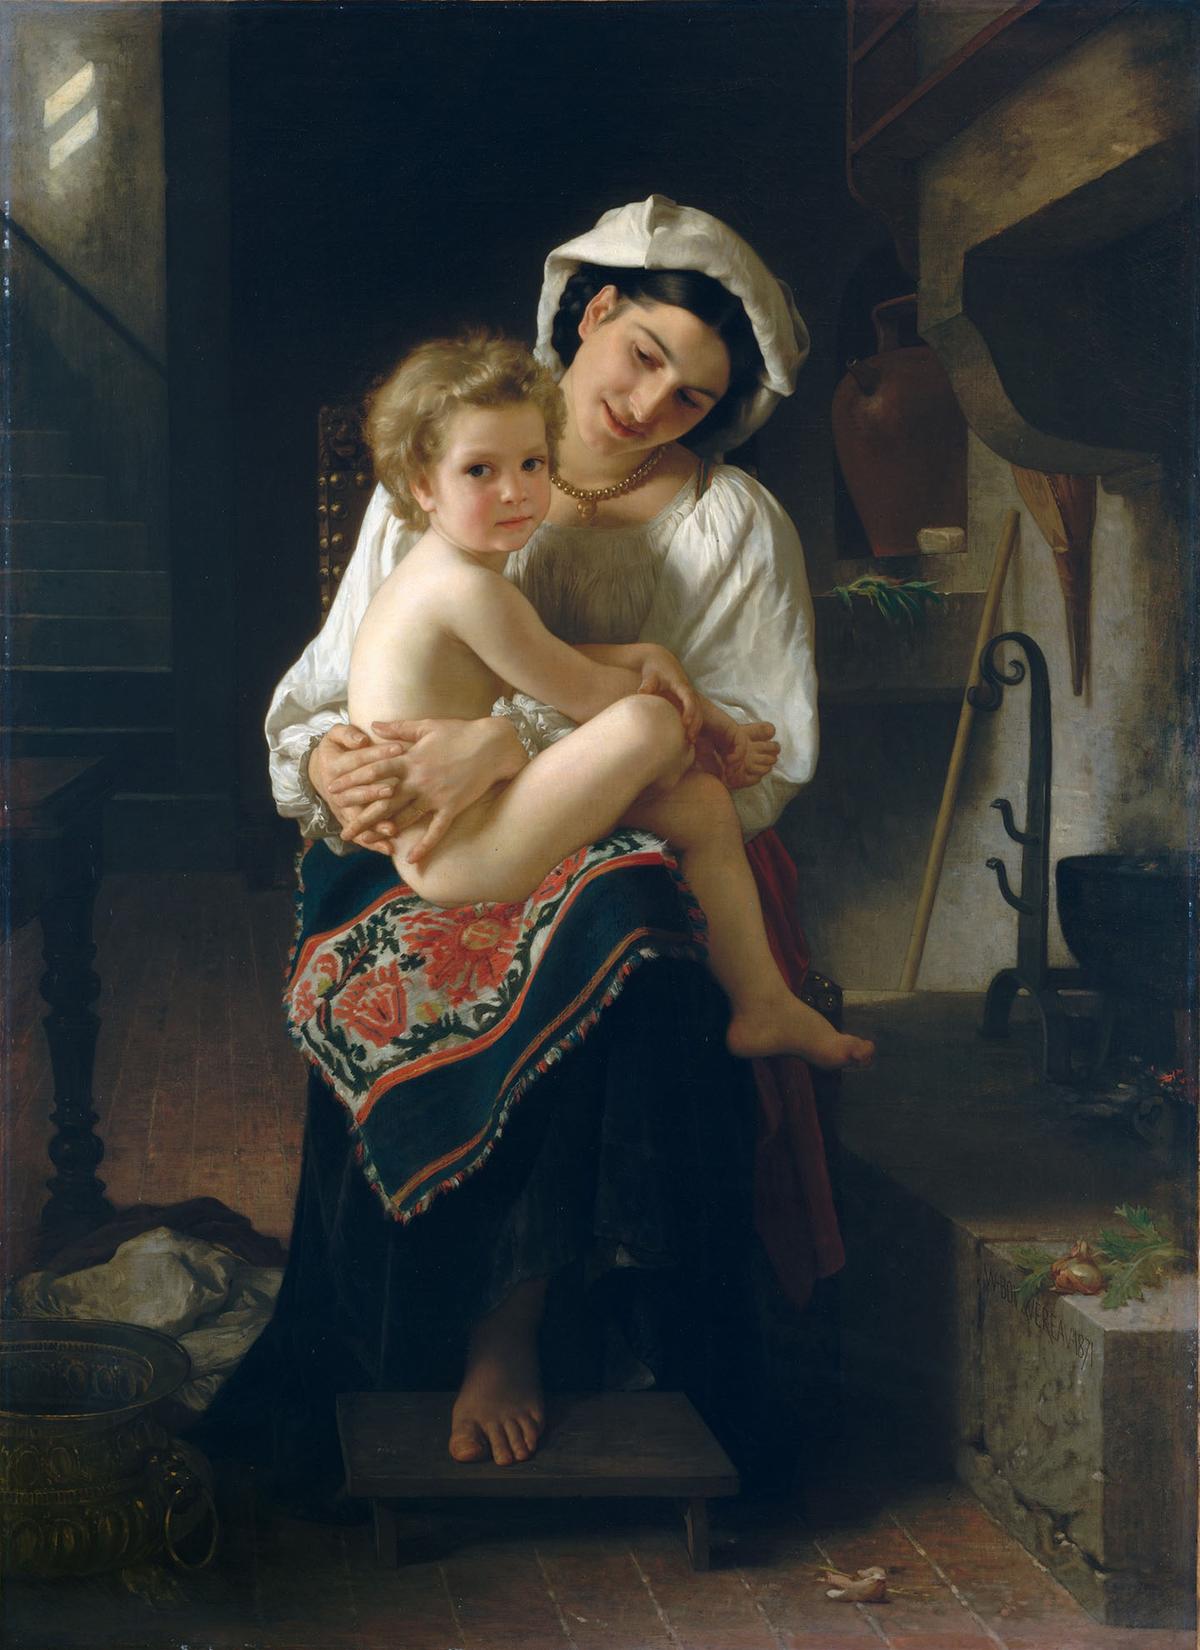 "Young Mother Gazing at Her Child," 1871, by William Adolphe Bouguereau. Oil on canvas. Metropolitan Museum of Art, New York City. (Public Domain)